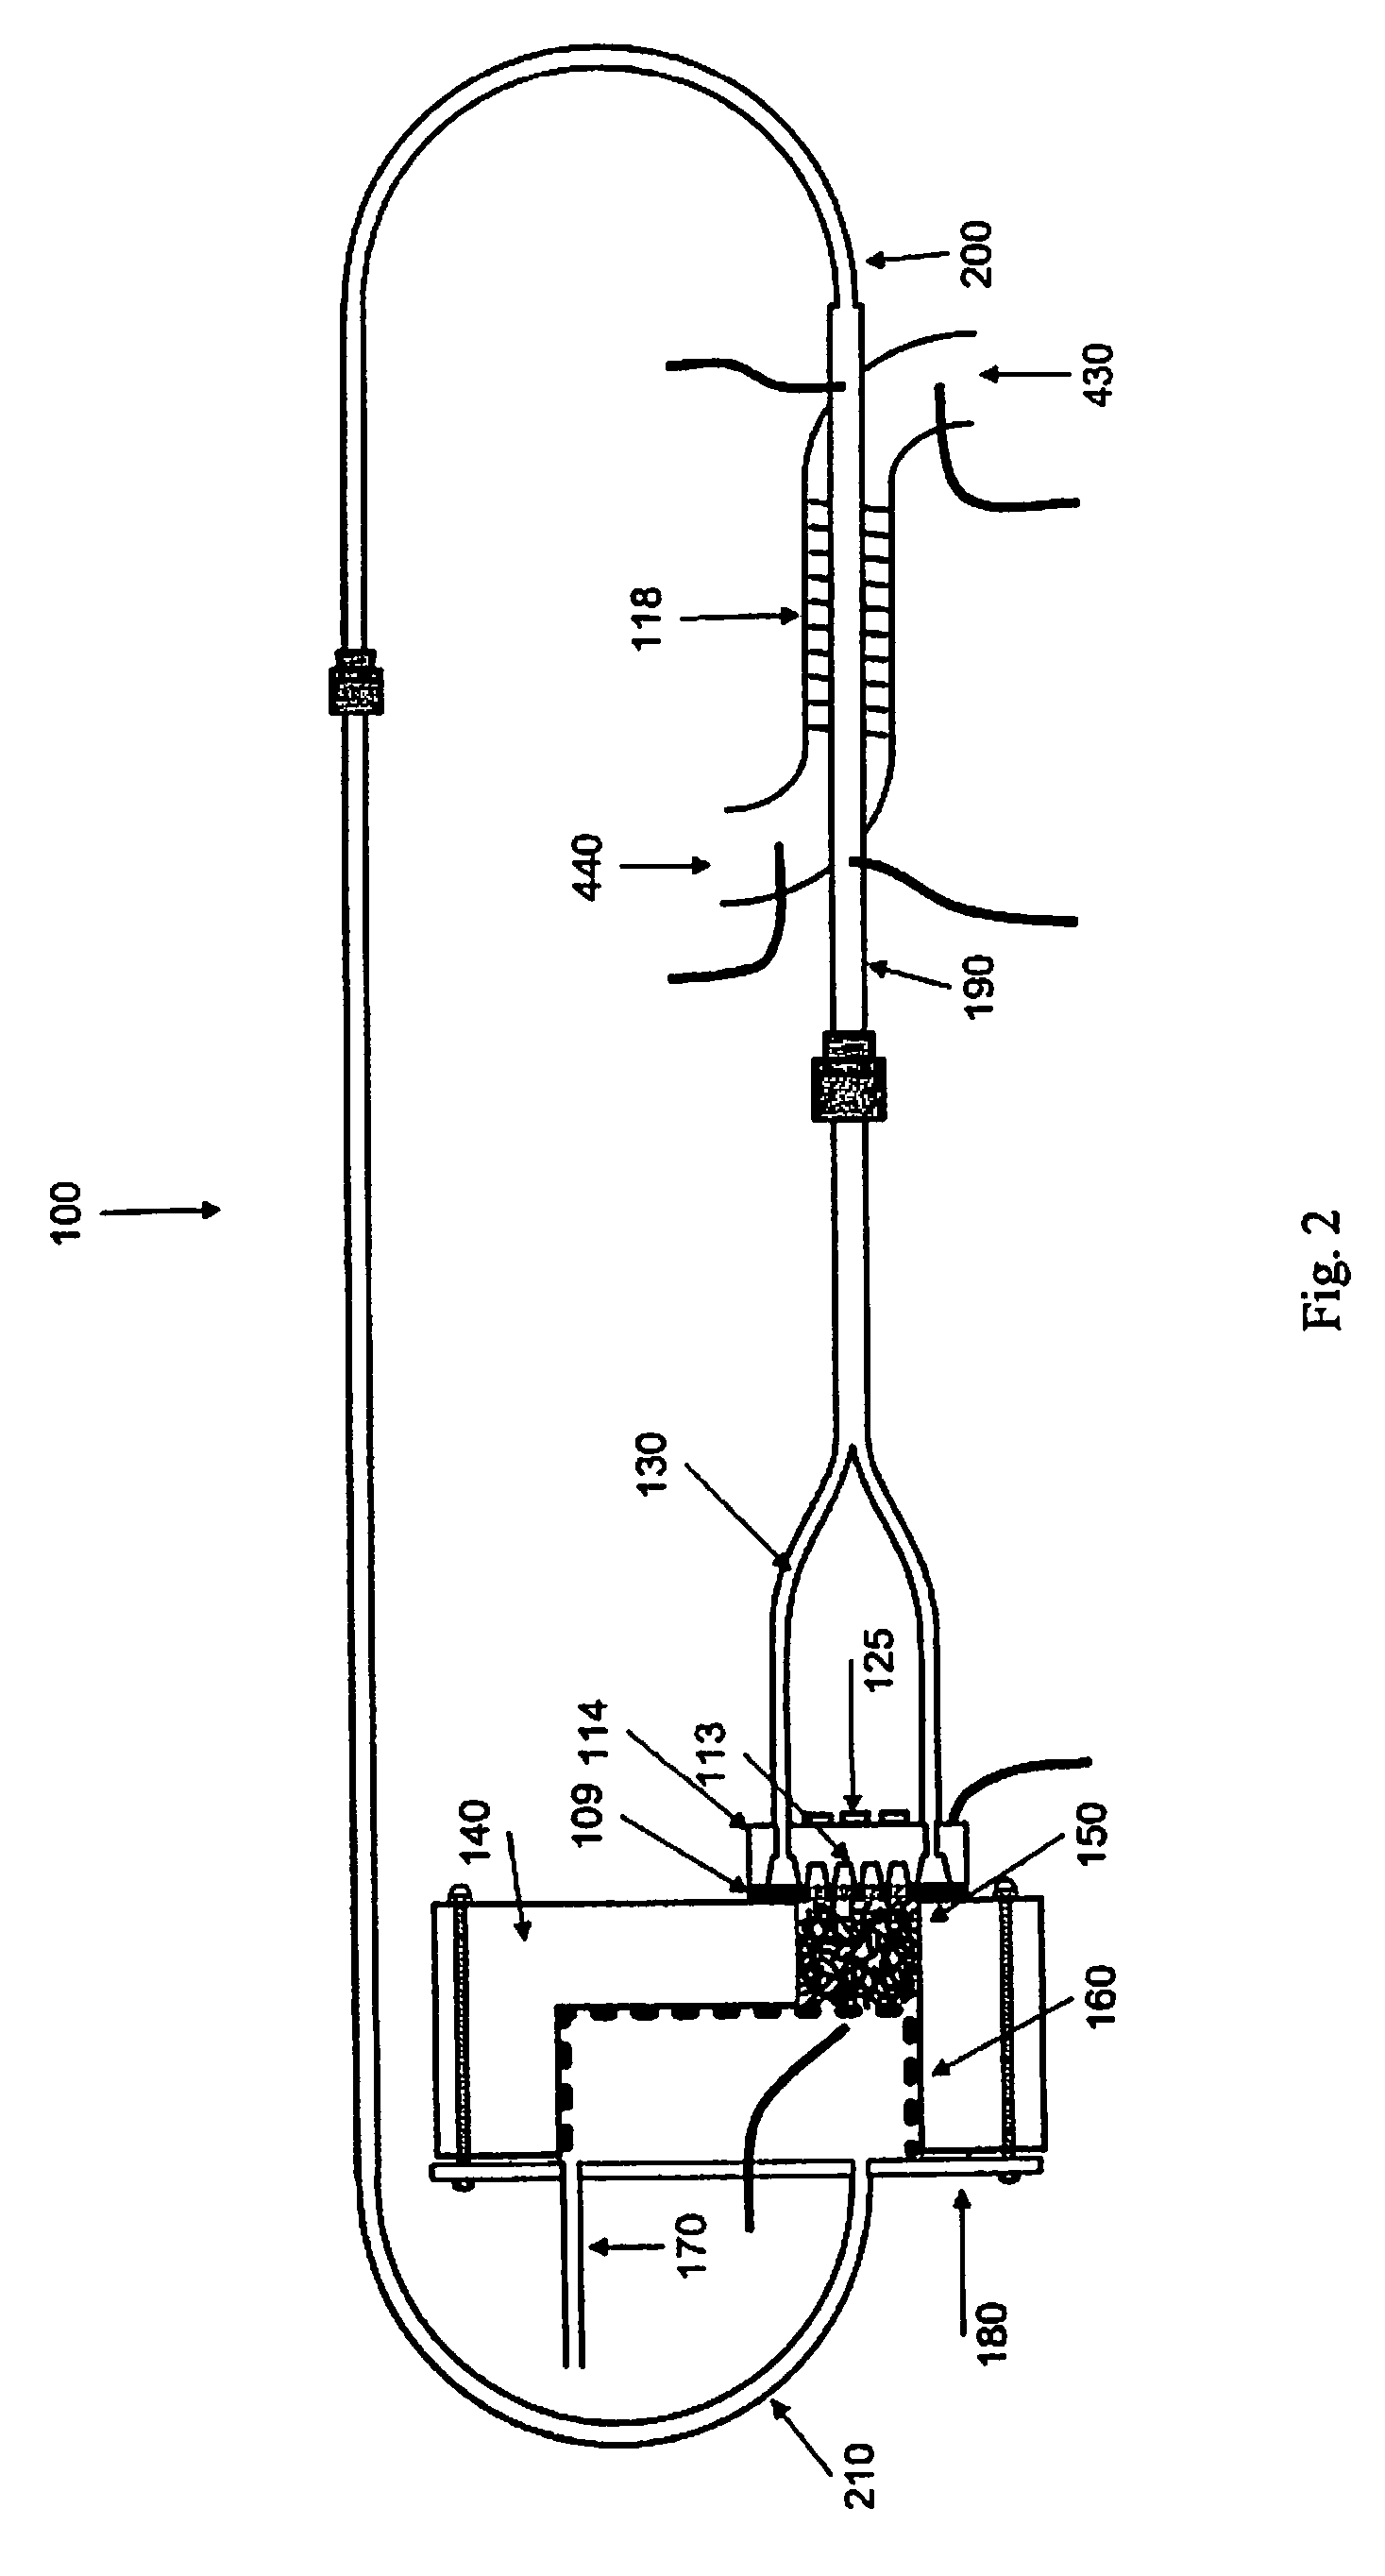 System and method of a heat transfer system and a condensor